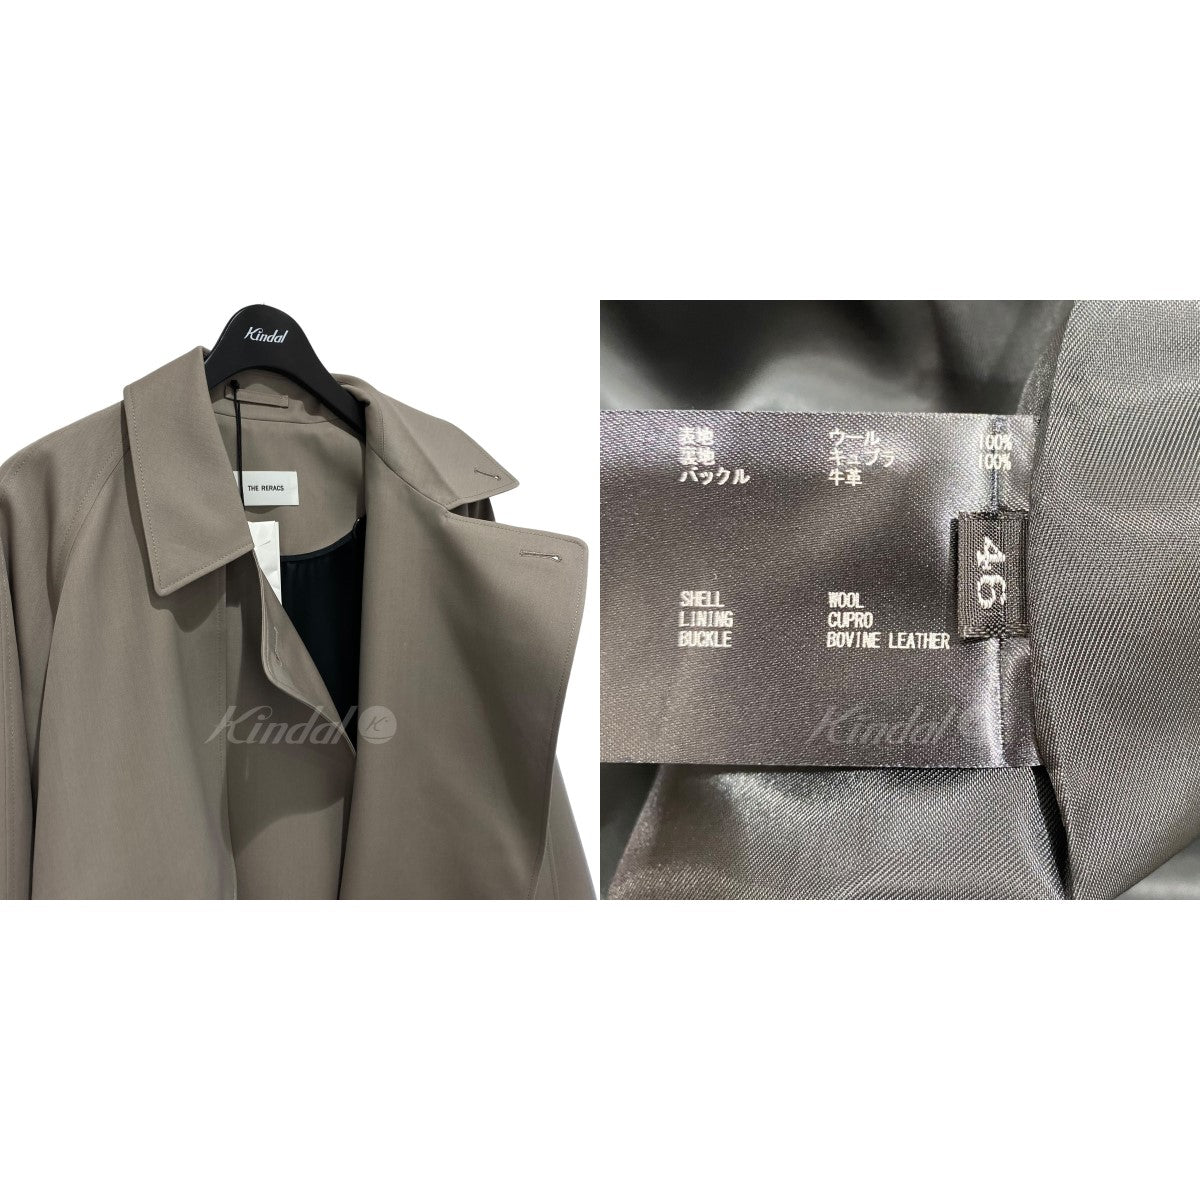 THE RERACS(ザ リラクス) 23SS THE TRENCH トレンチコート 23SS-RECT ...